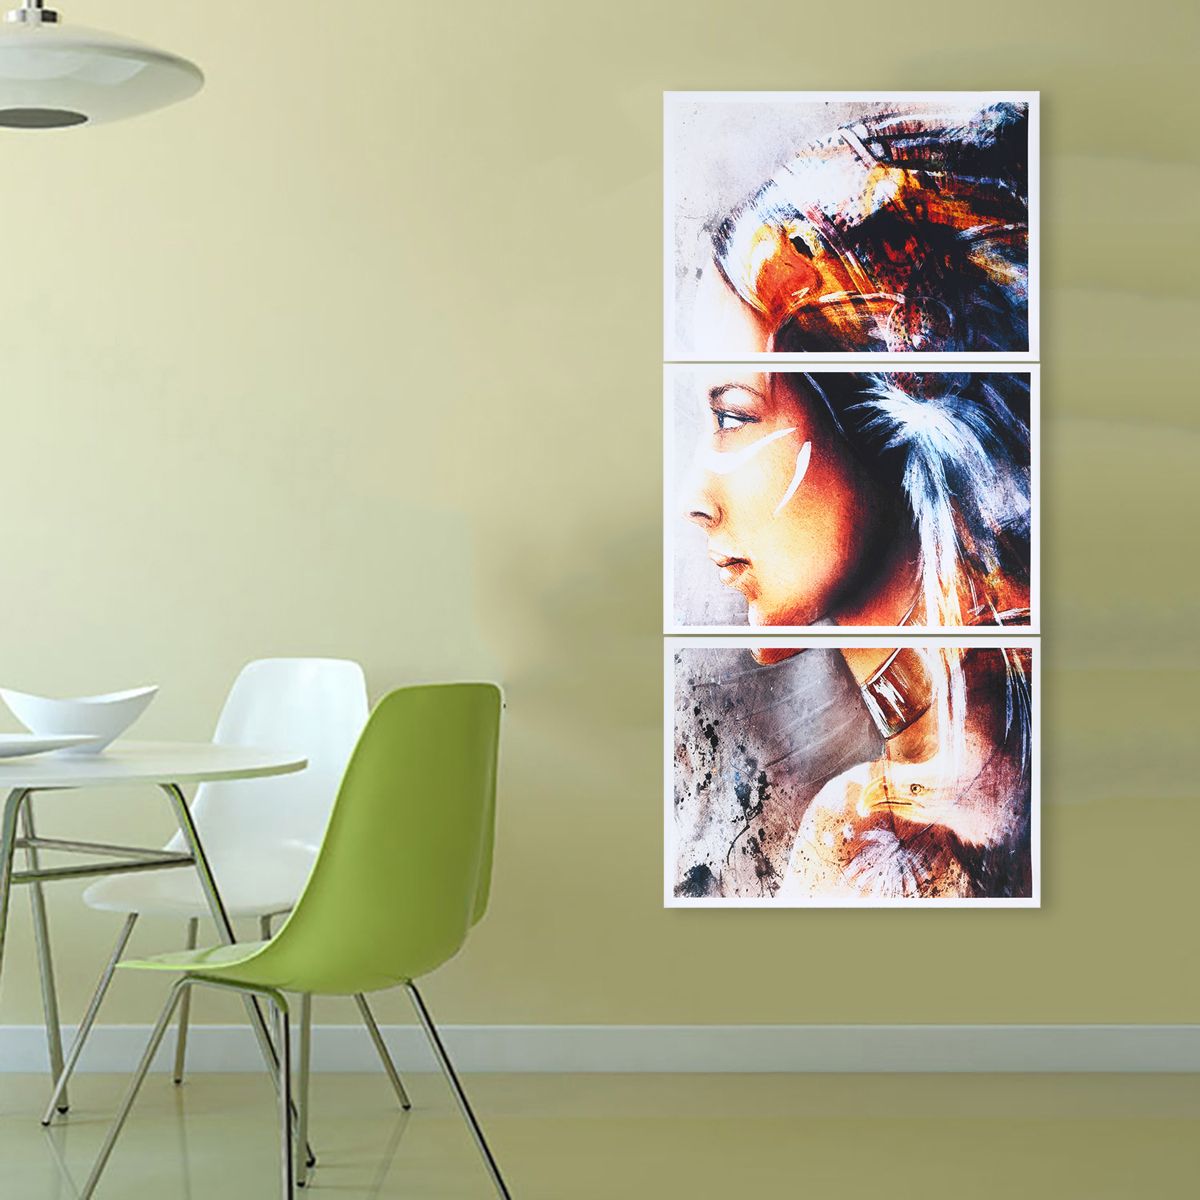 3PcsSet-Modern-Unframed-Canvas-Print-Painting-Poster-Wall-Art-Picture-Home-Decorations-1464482